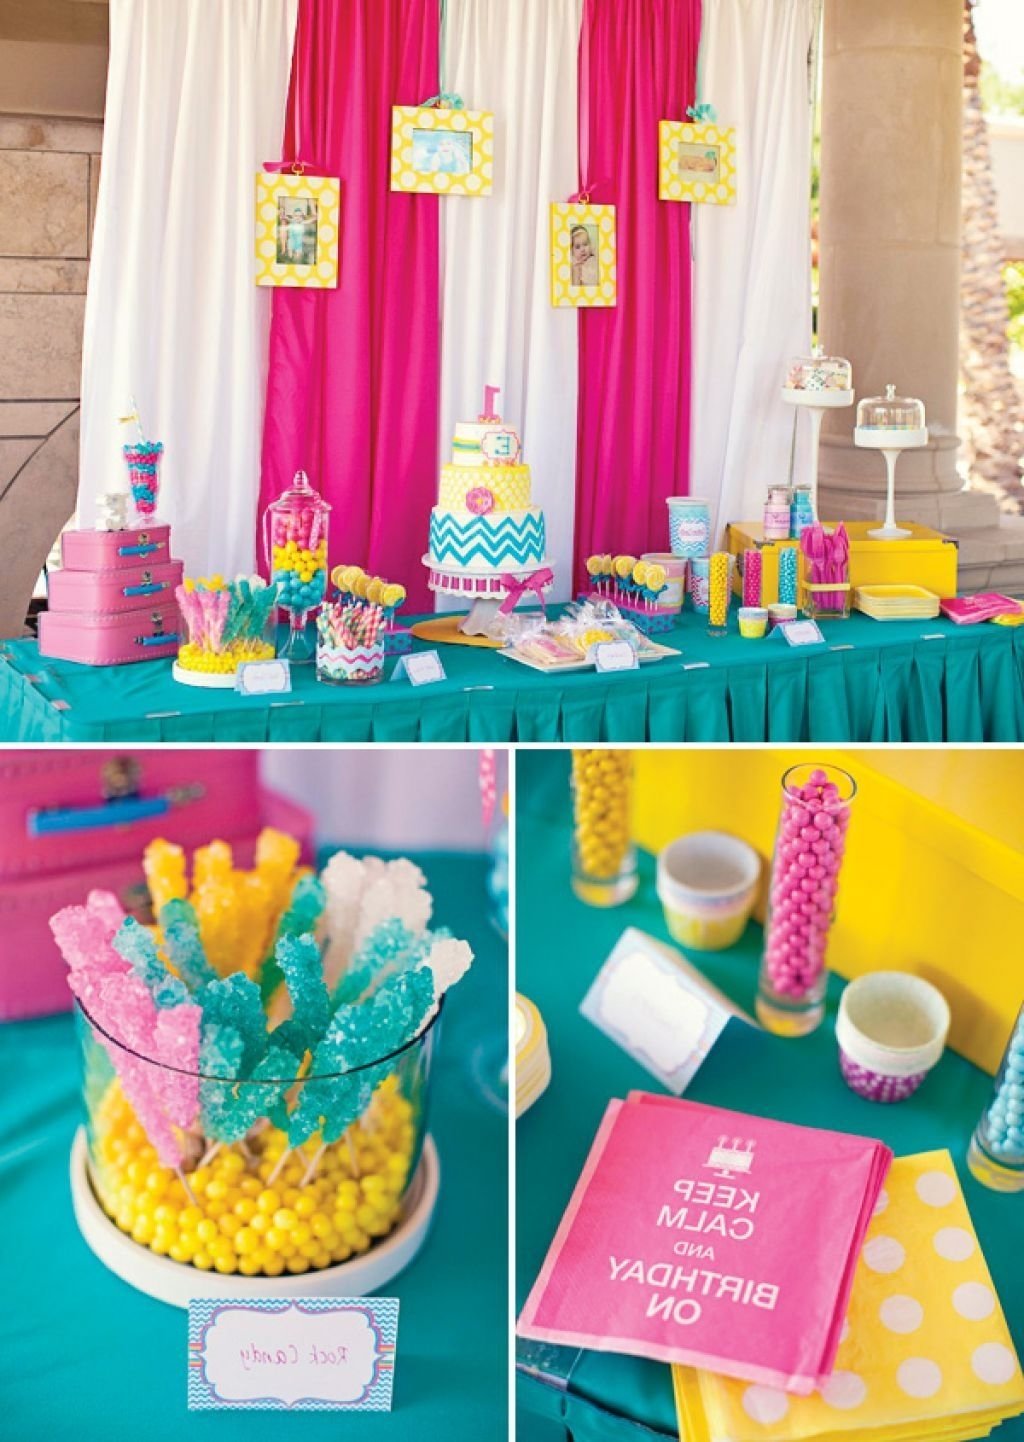 10 Fashionable Birthday Party Ideas For 3 Year Old outdoor party decorations google search madeline pinterest 25 2022